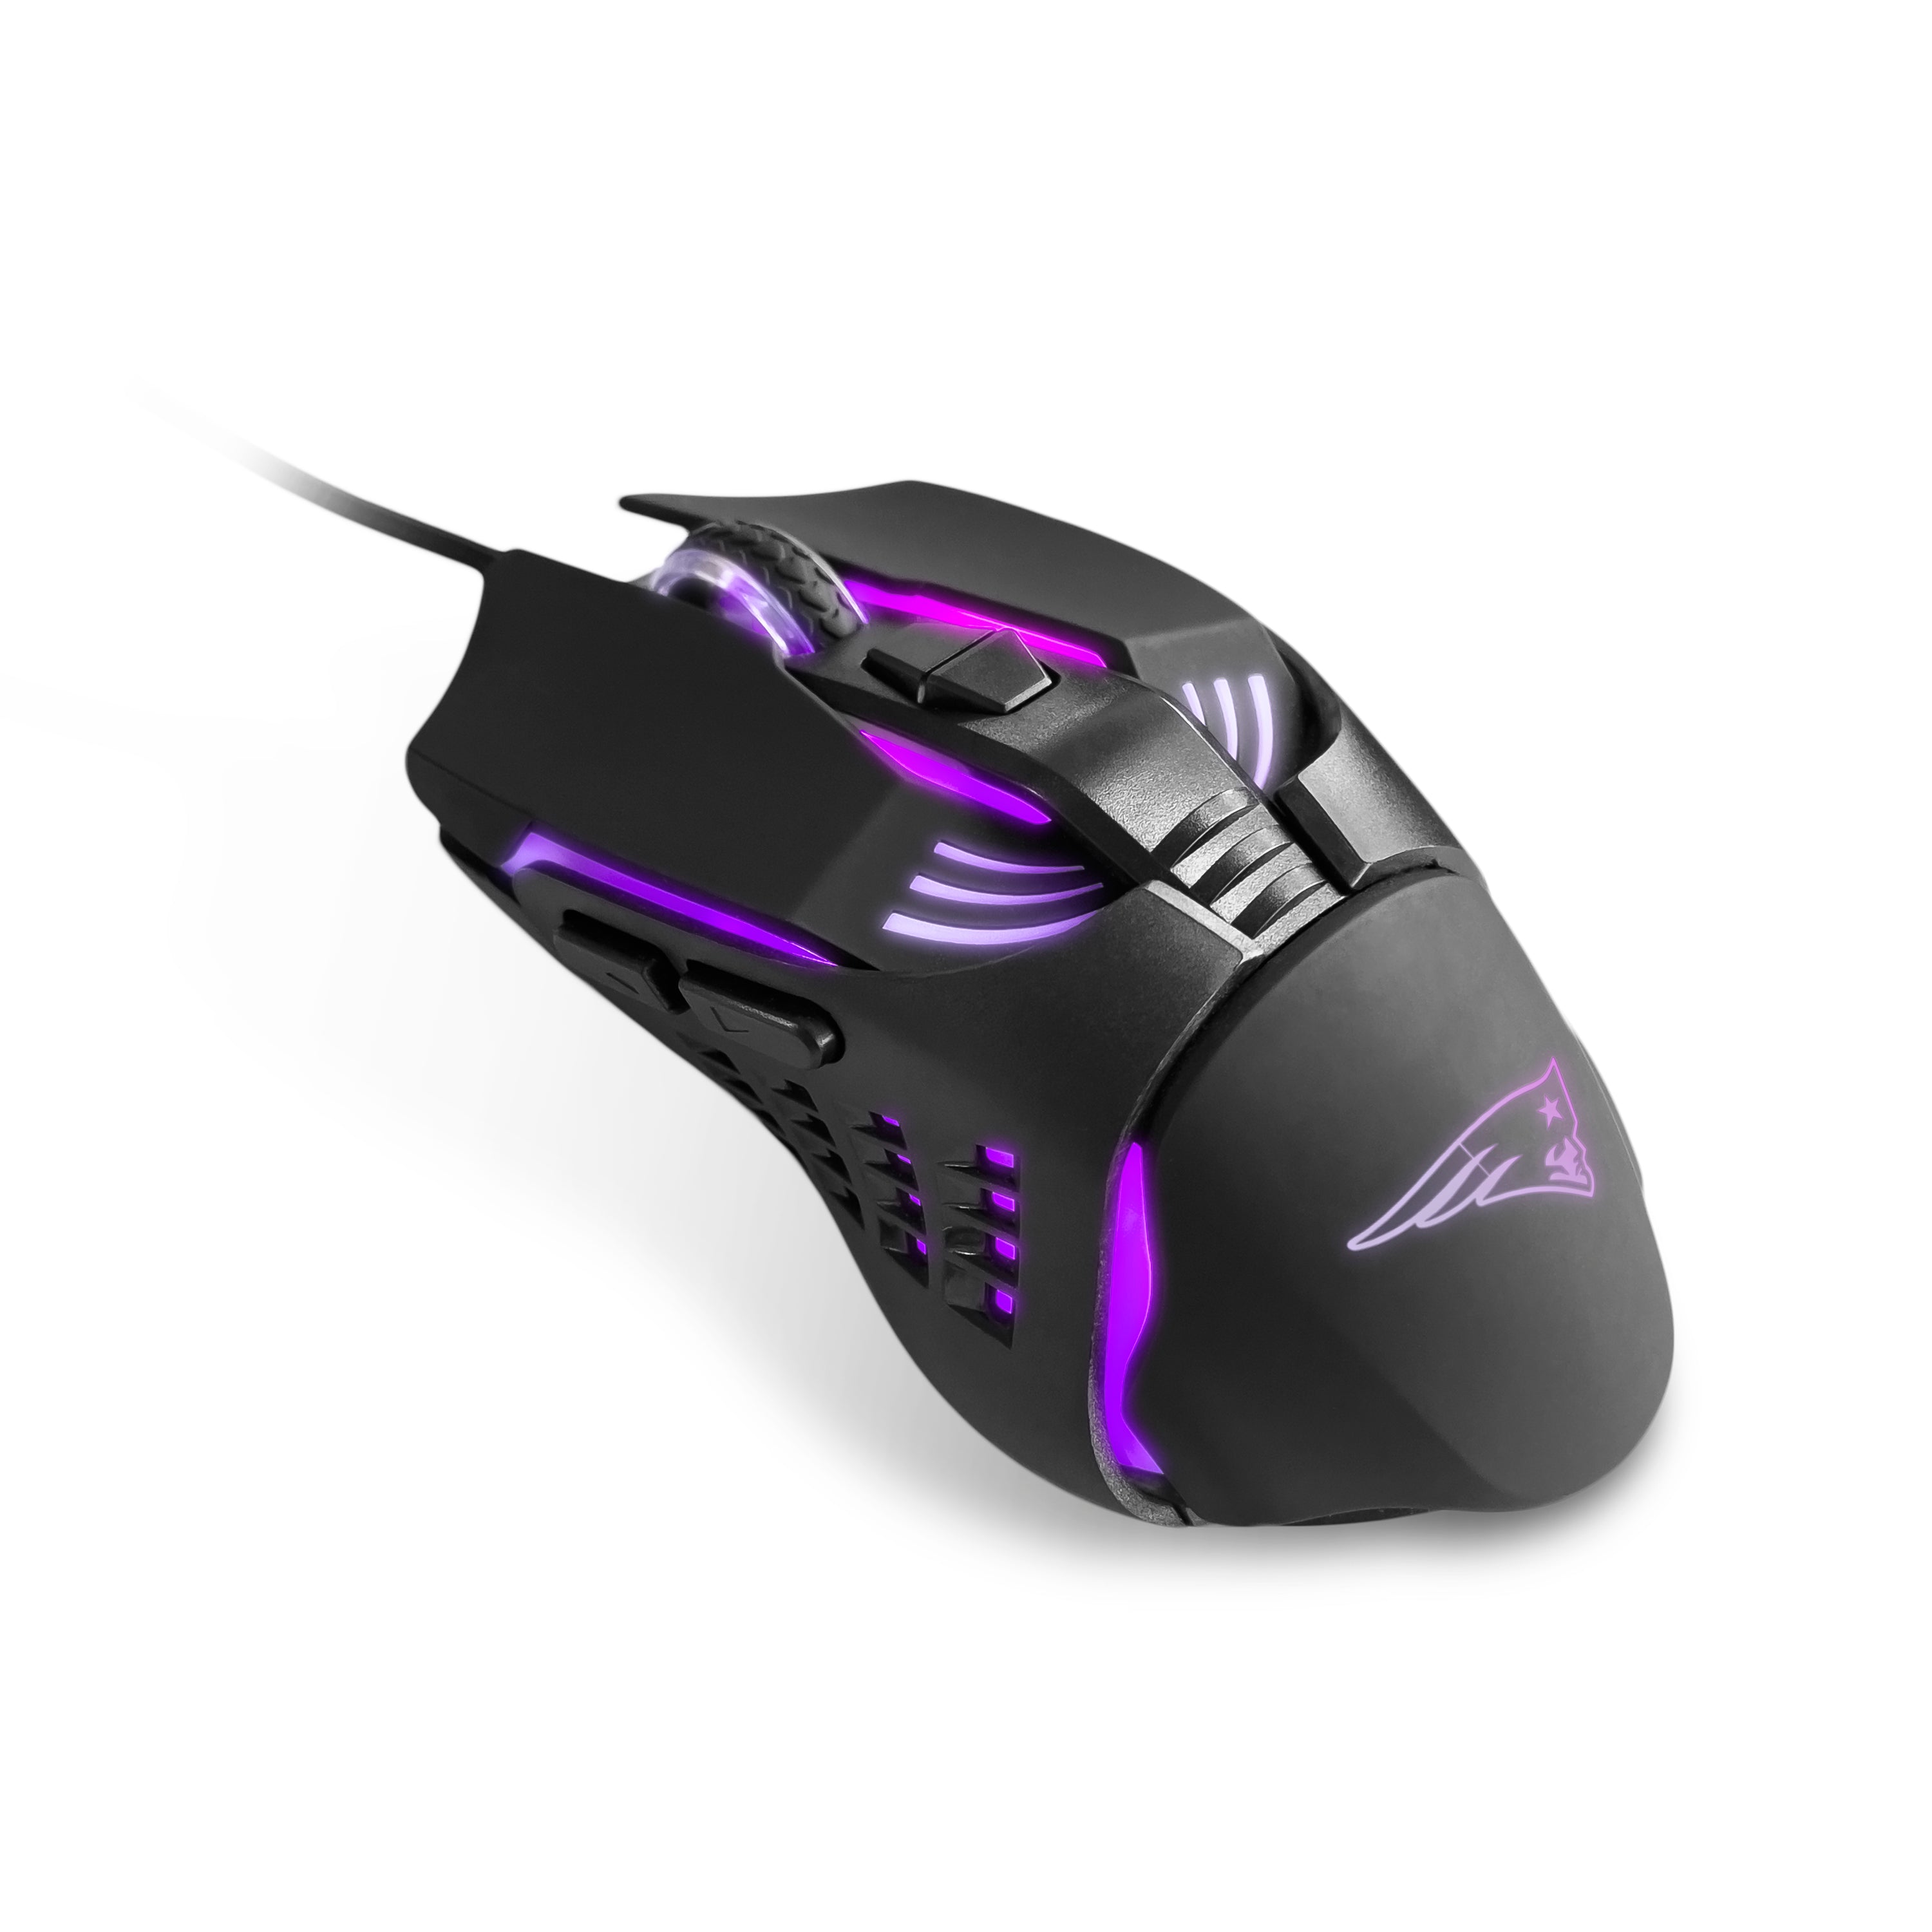 NFL Wired LED Gaming Mouse